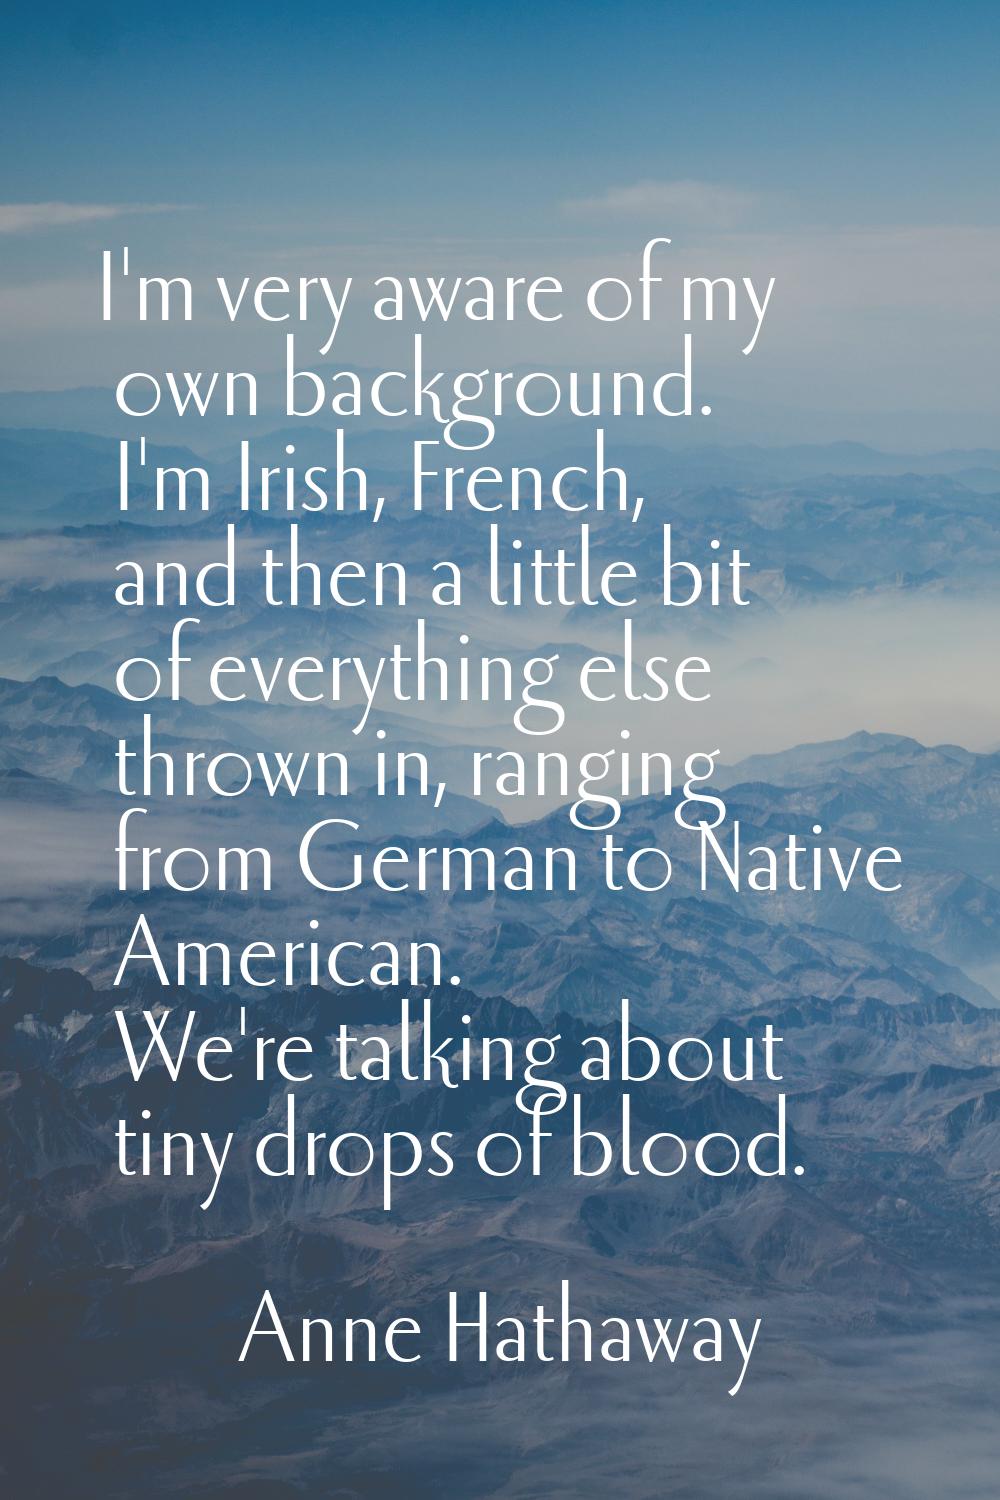 I'm very aware of my own background. I'm Irish, French, and then a little bit of everything else th